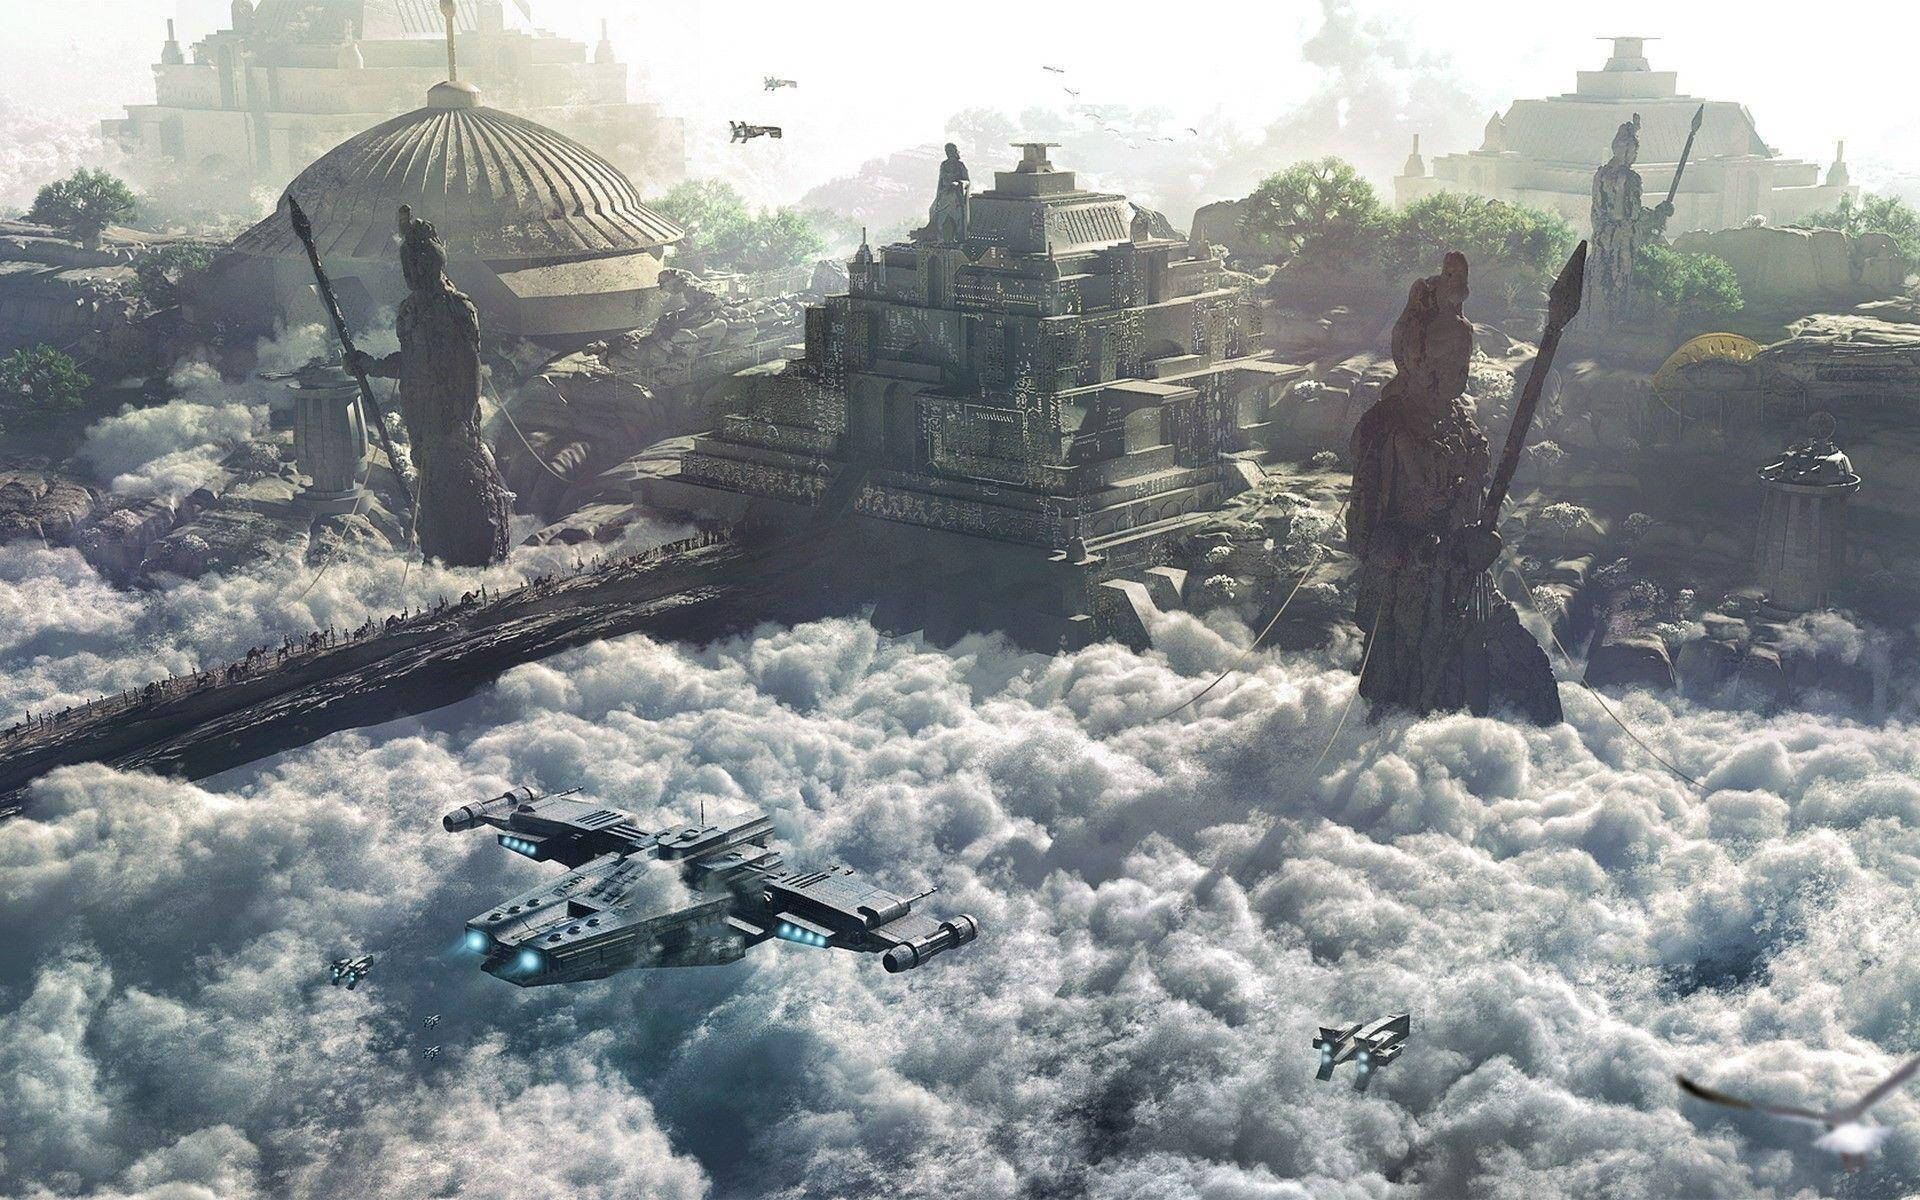 Majestic Statues Hovering in Clouds - A Dramatic Scene from Civilization 5 Wallpaper